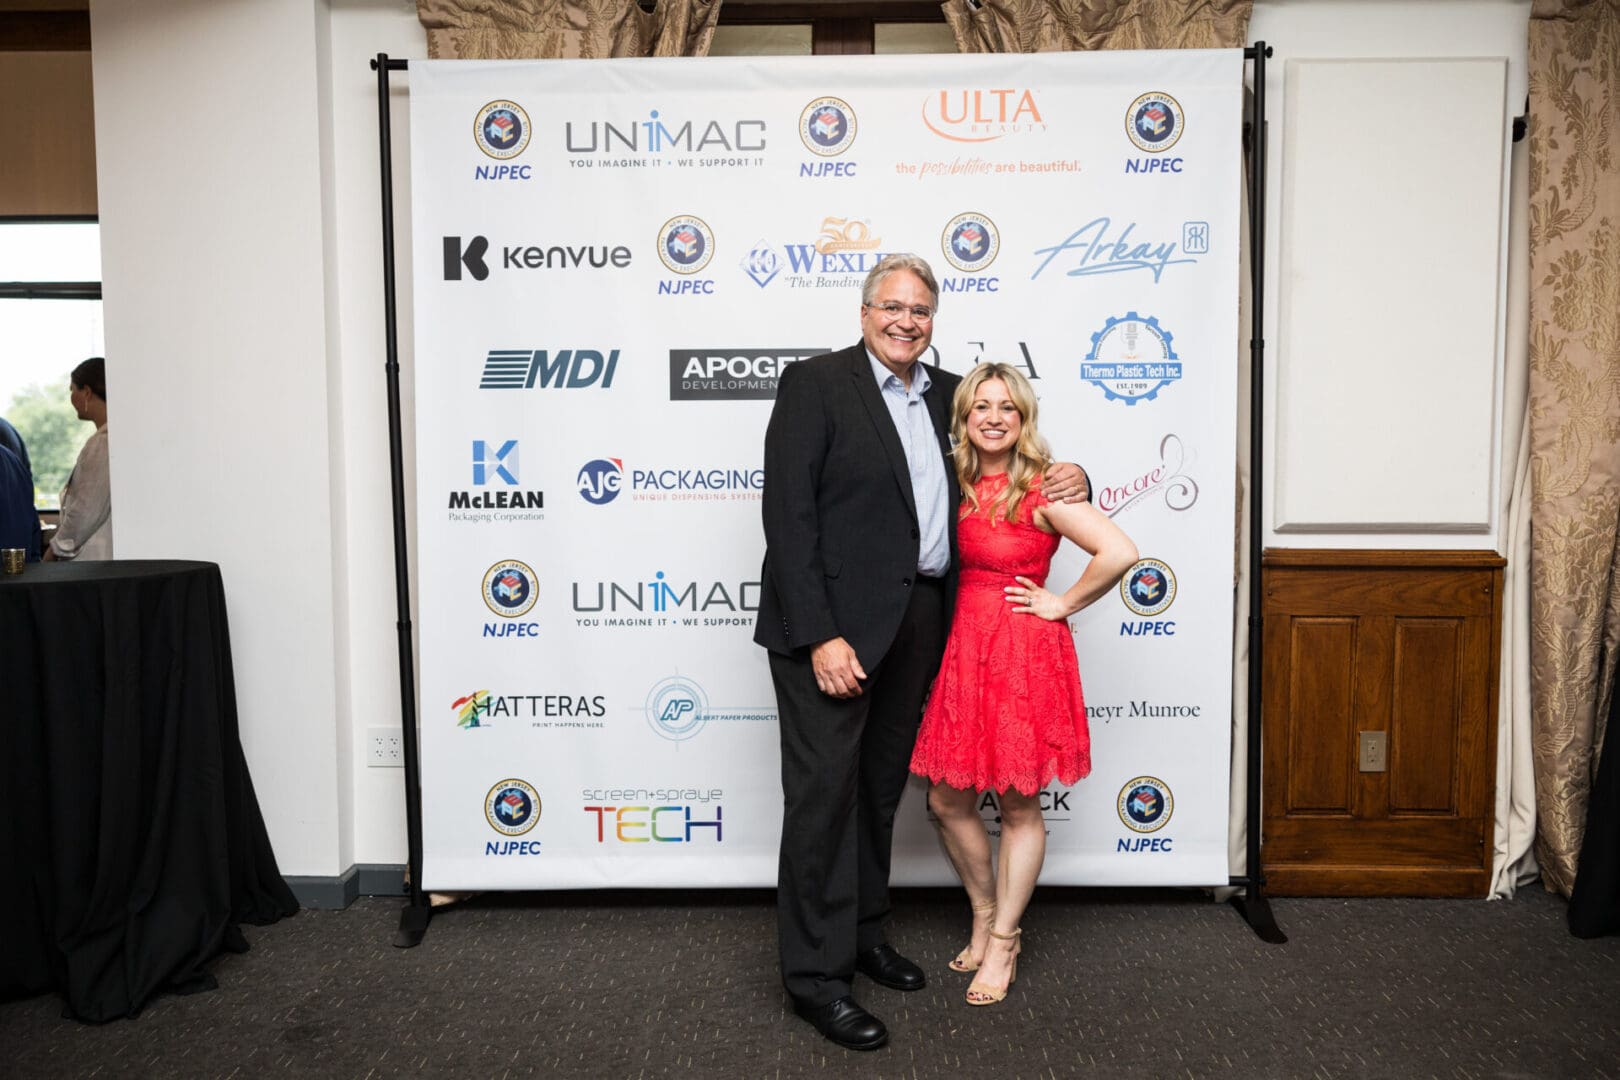 A man and a woman pose for a photo at an event.